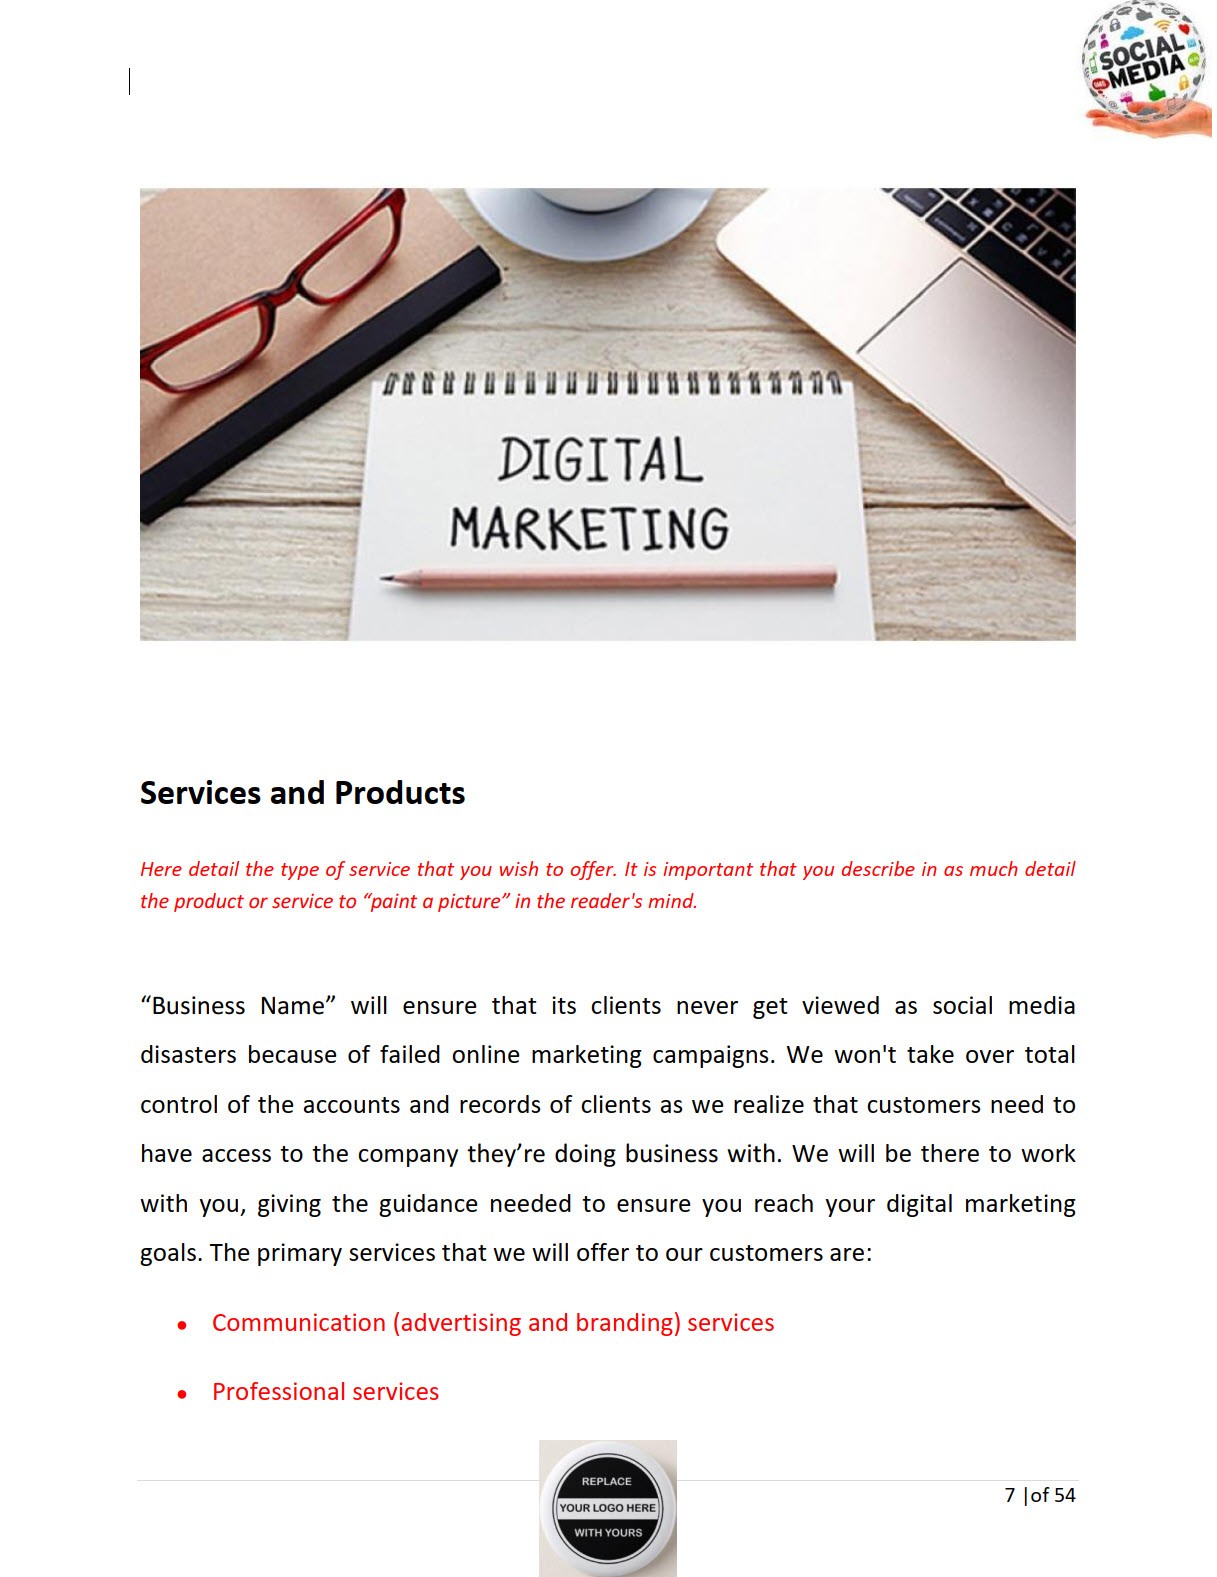 Digital Marketing Agency Business Plan Template Sample Pages Black